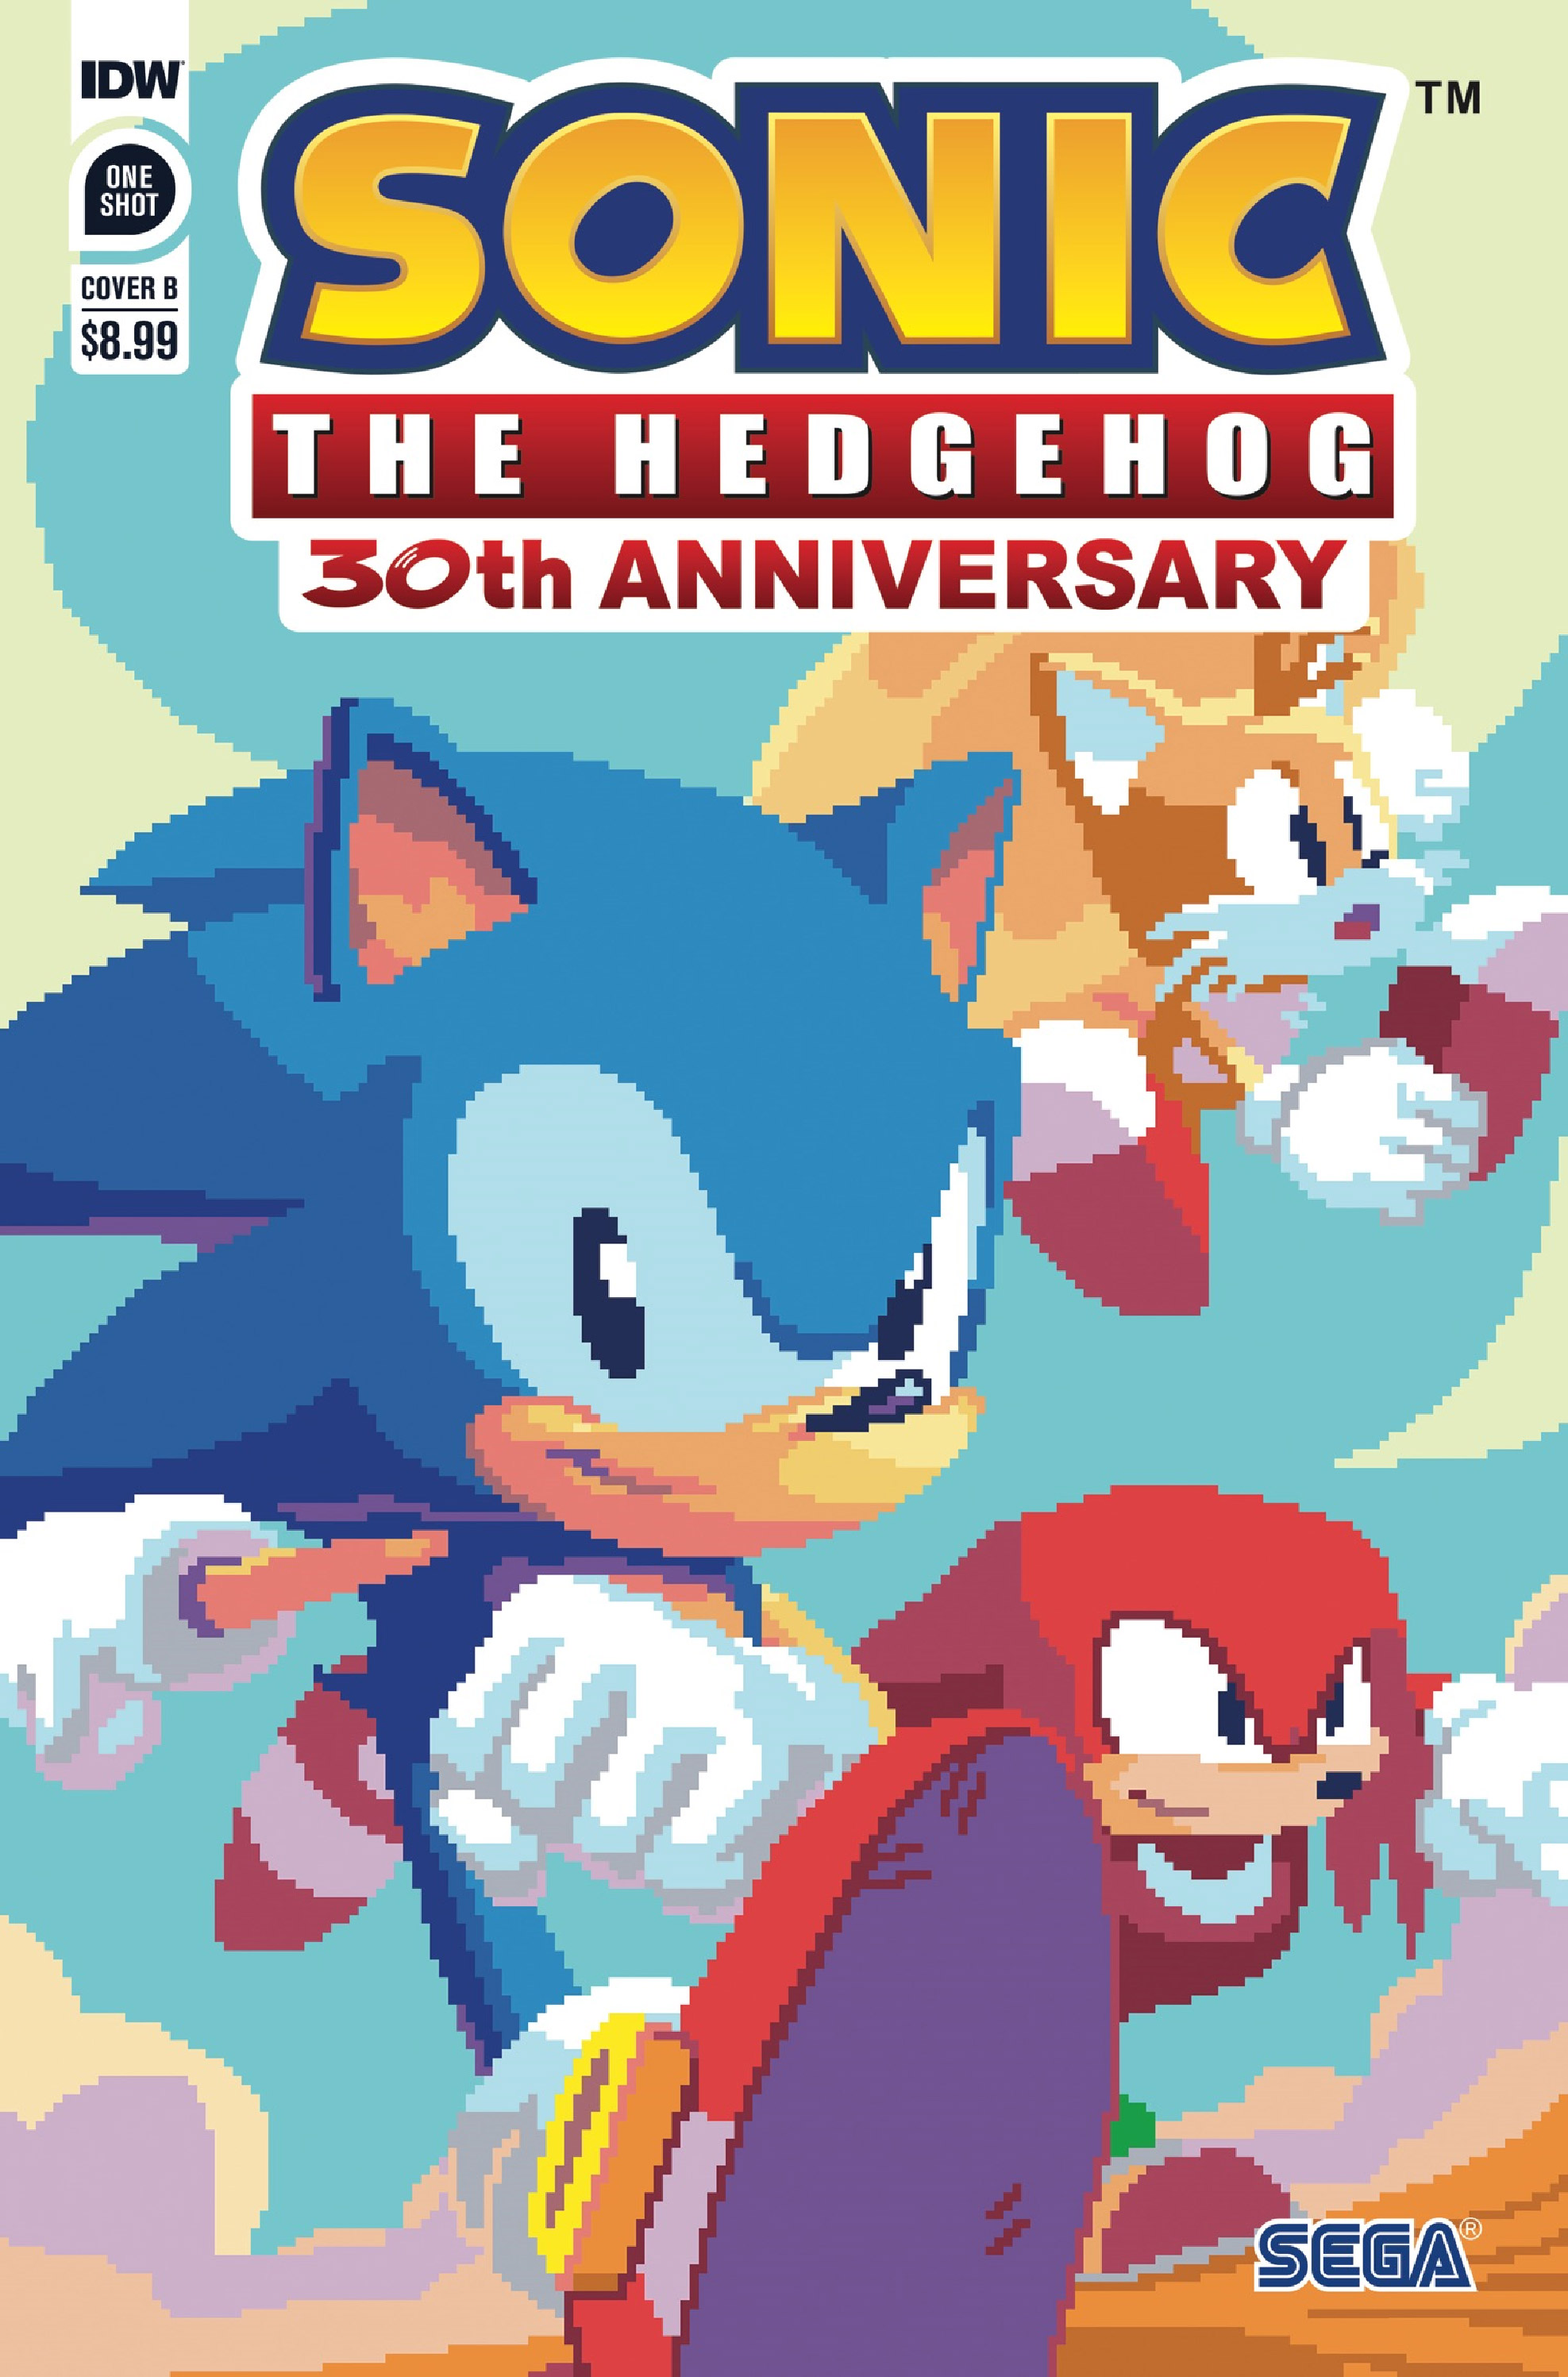 Sonic the Hedgehog 30th anniversary comic cover B - featuring Sonic, Knuckles, and Tails